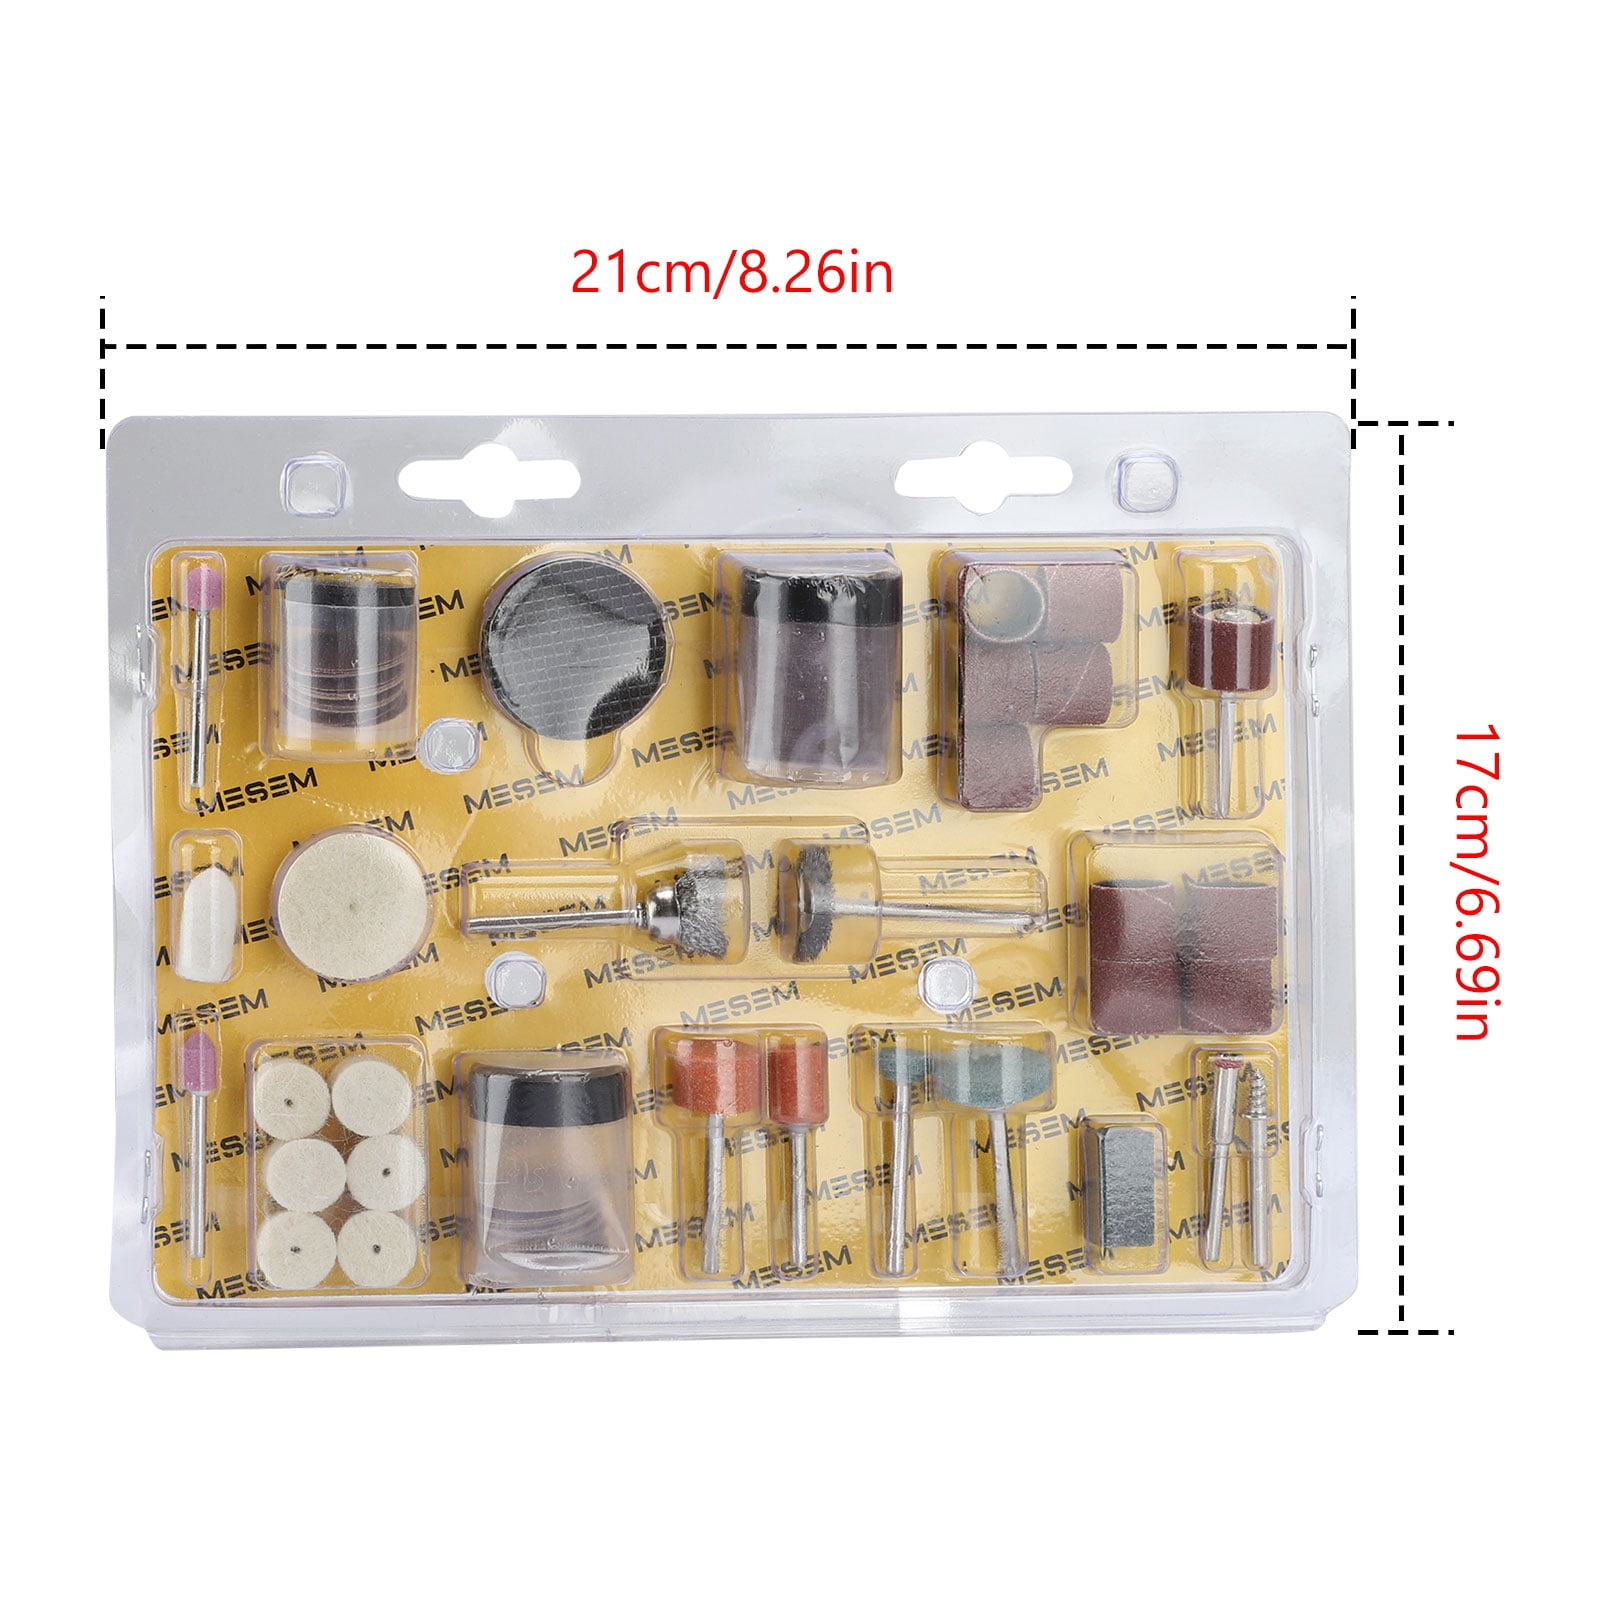  Sanhooii Mini Rotary Tool Kit With 105pcs Accessories Set For  Wood Jewel Stone Small Crafts Cutting Drilling Grinding Engraving : Arts,  Crafts & Sewing